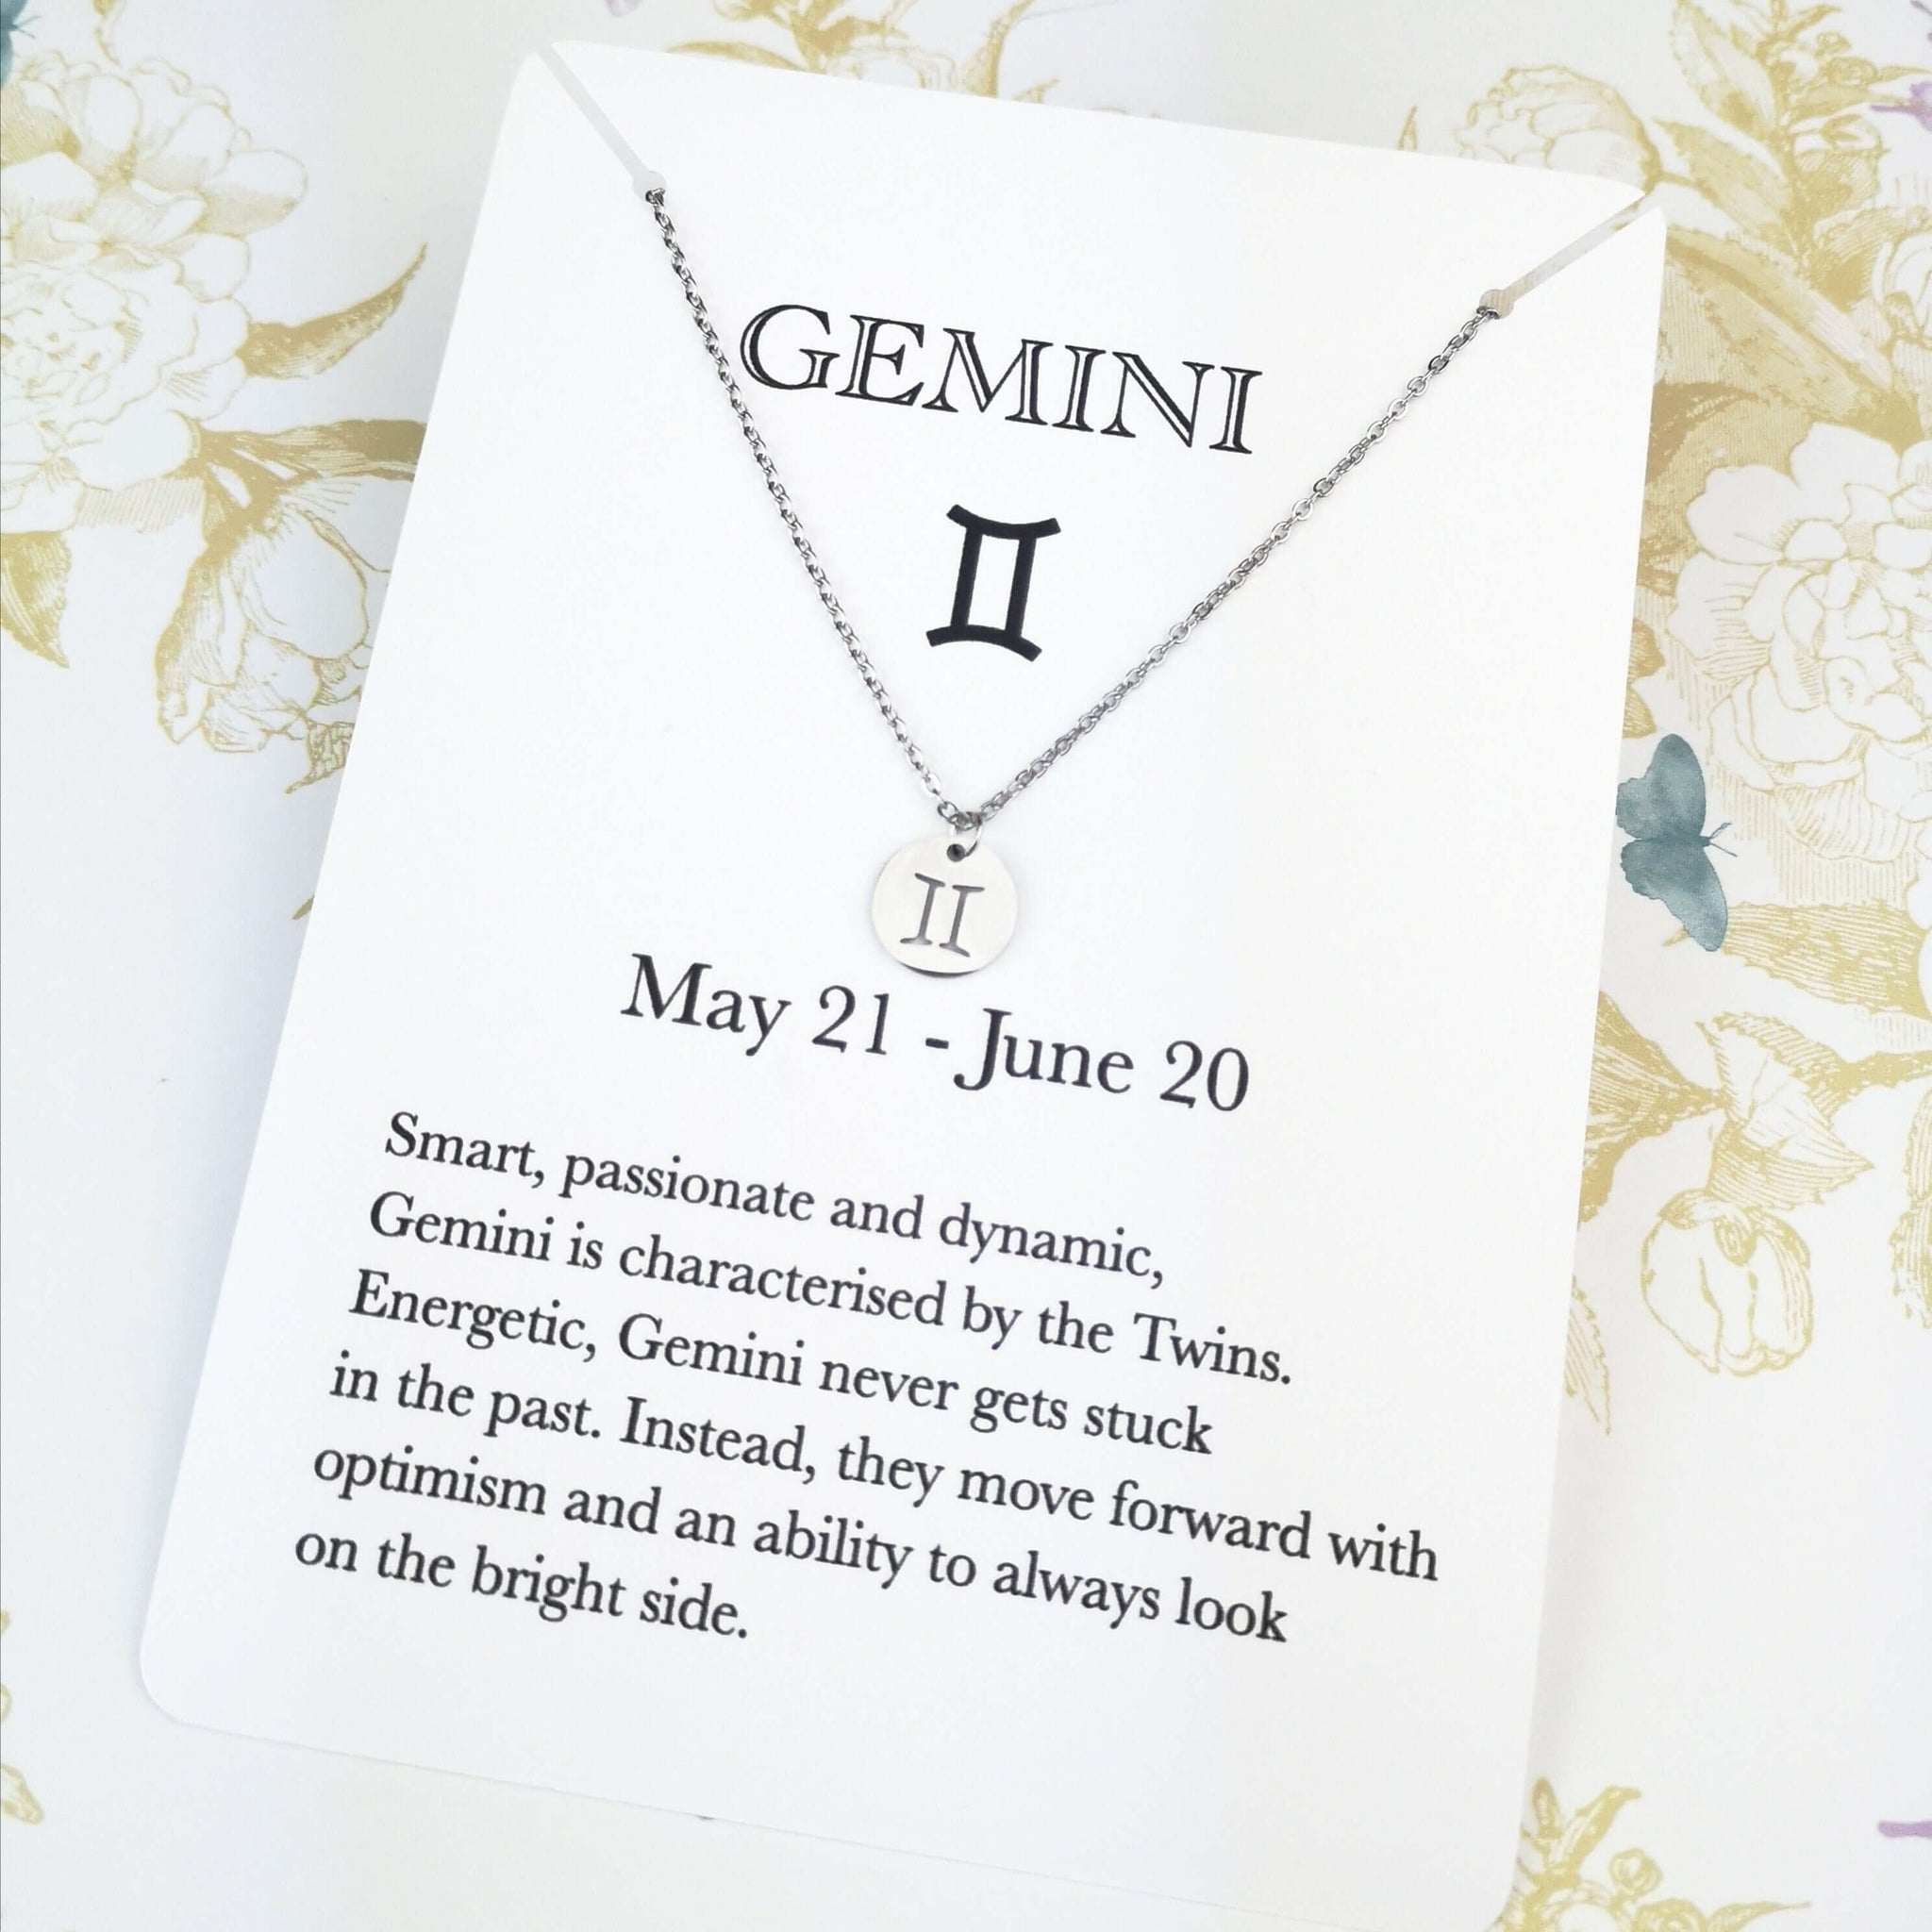 Gemini star sign necklace